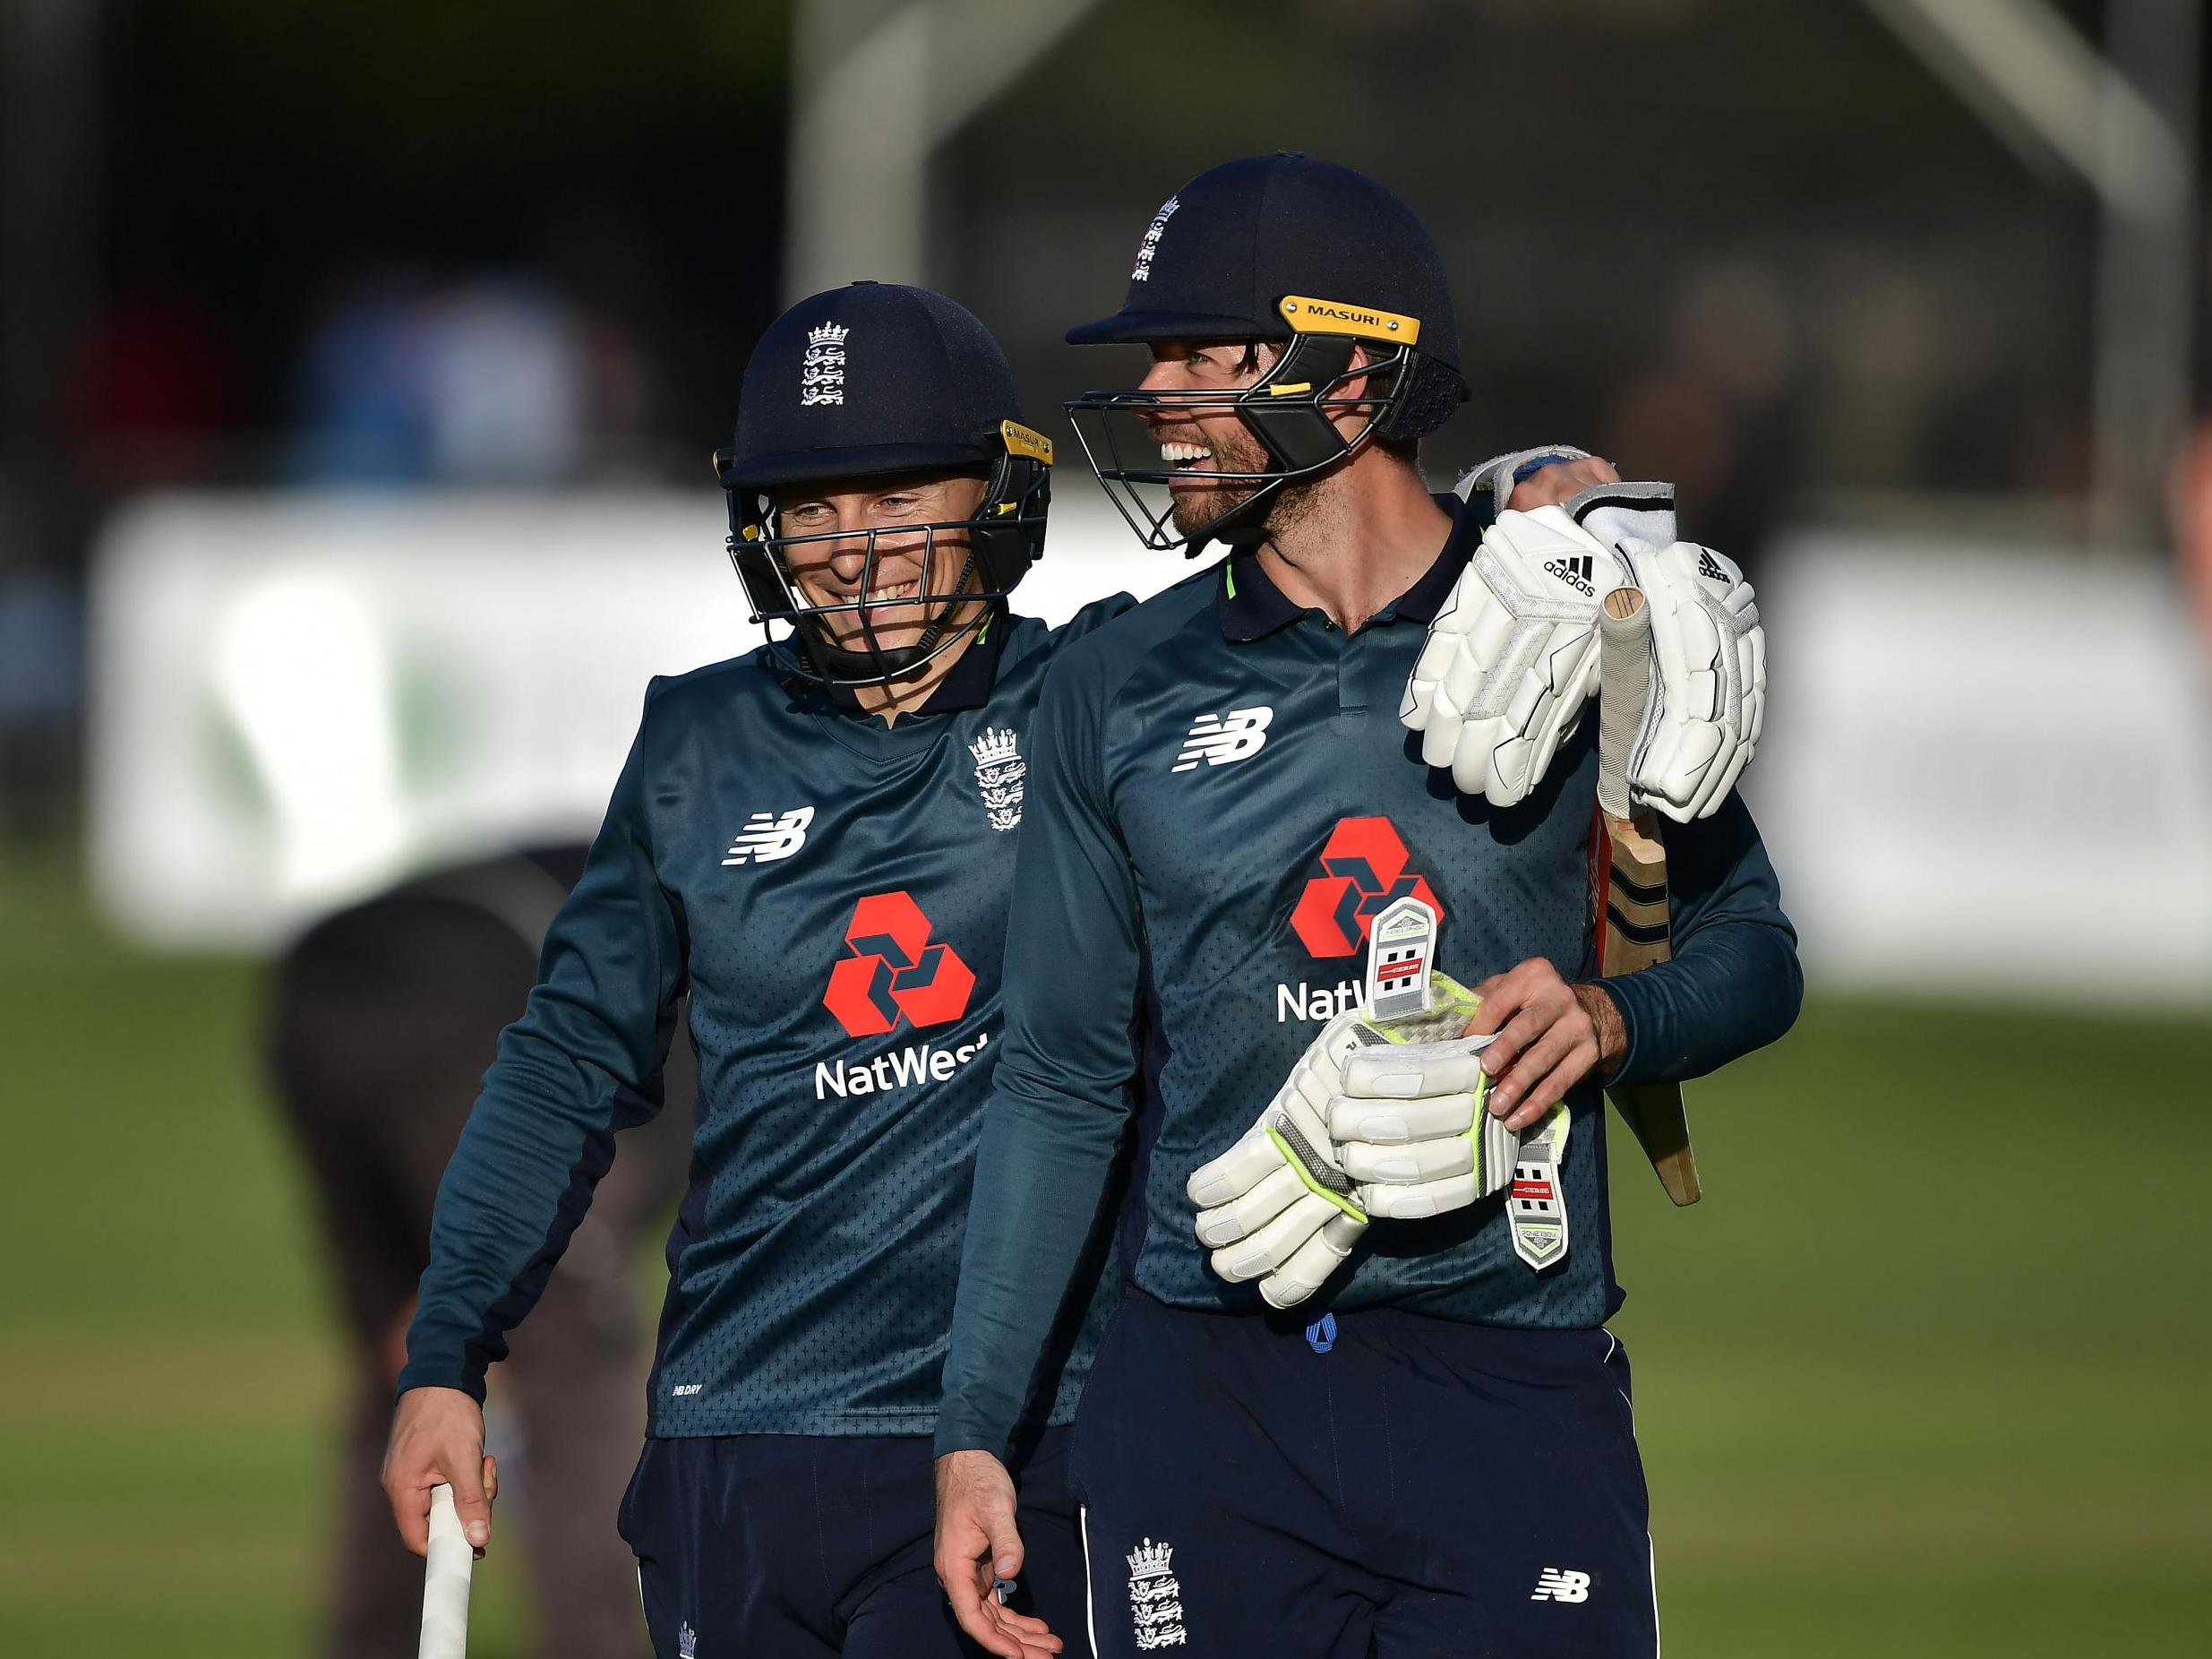 Foakes and Curran got England over the line against Ireland